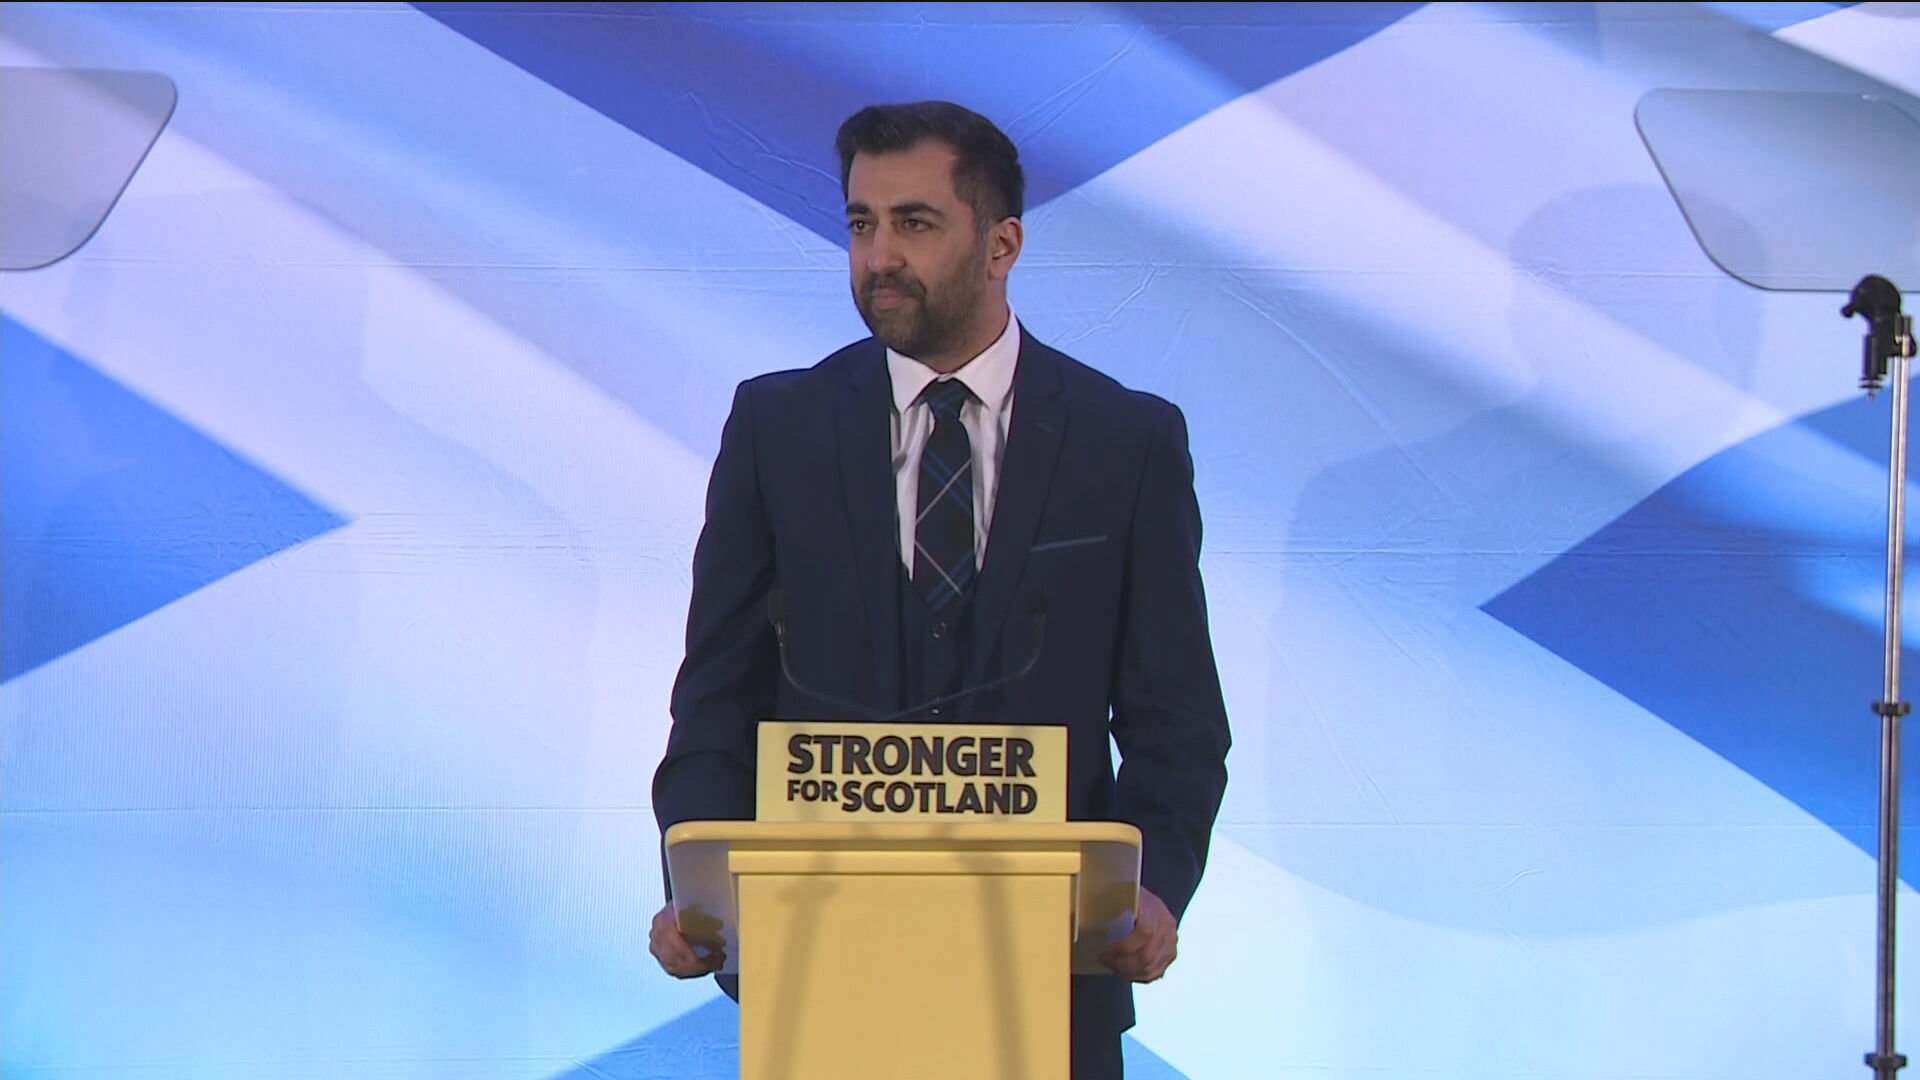 Humza Yousaf is set to be Scotland's next First Minister after winning the SNP leadership contest.